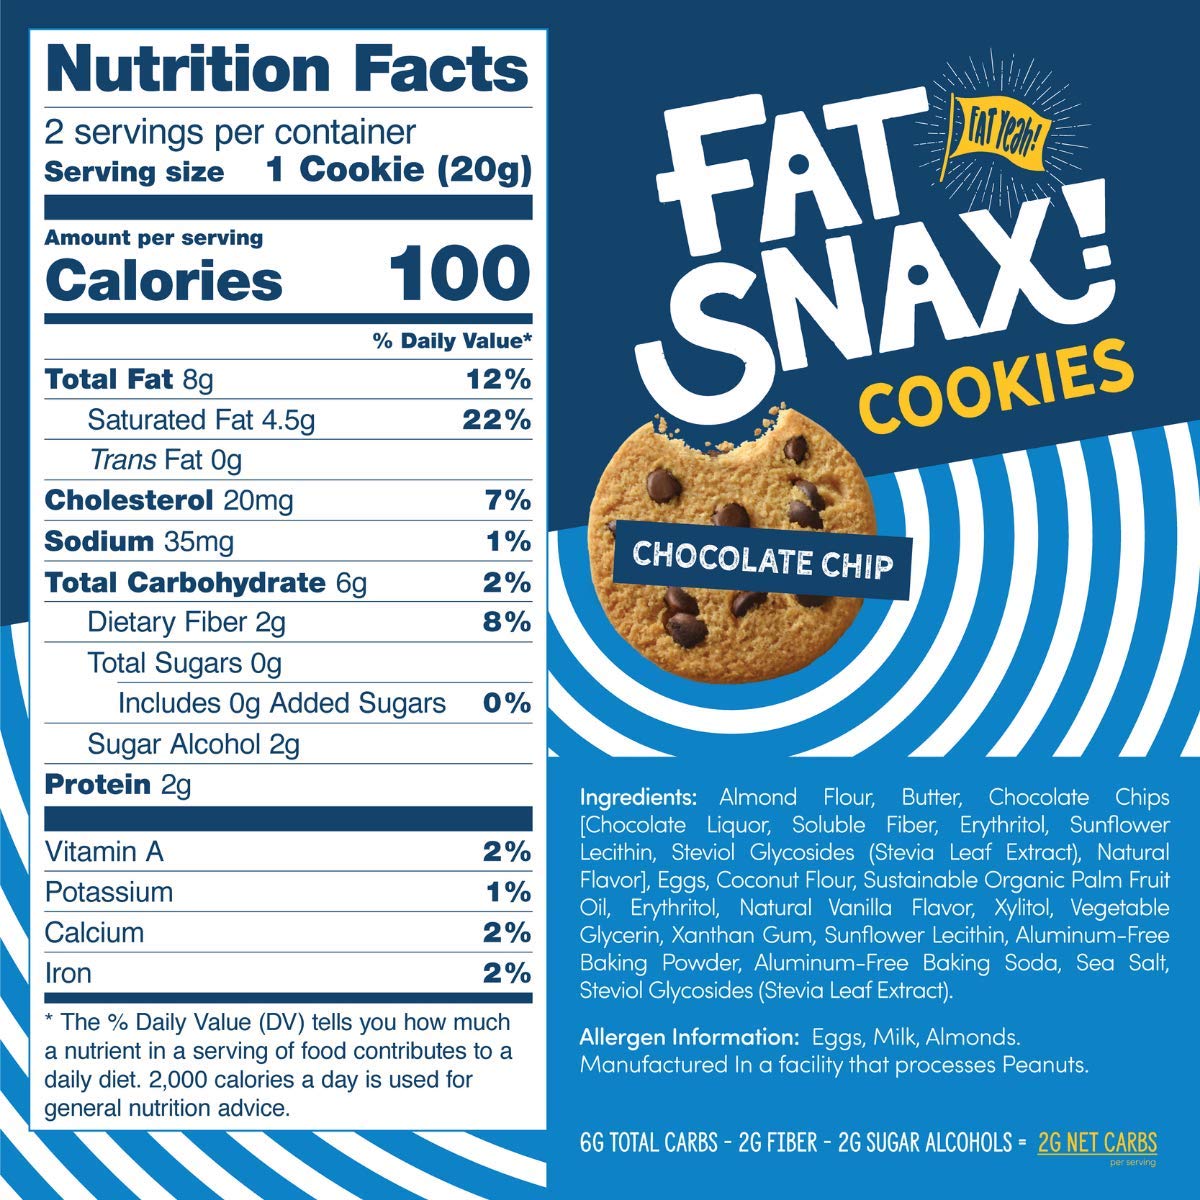 Fat Snax Cookies - Chocolate Chip - High-quality Protein Cookies by Fat Snax at 